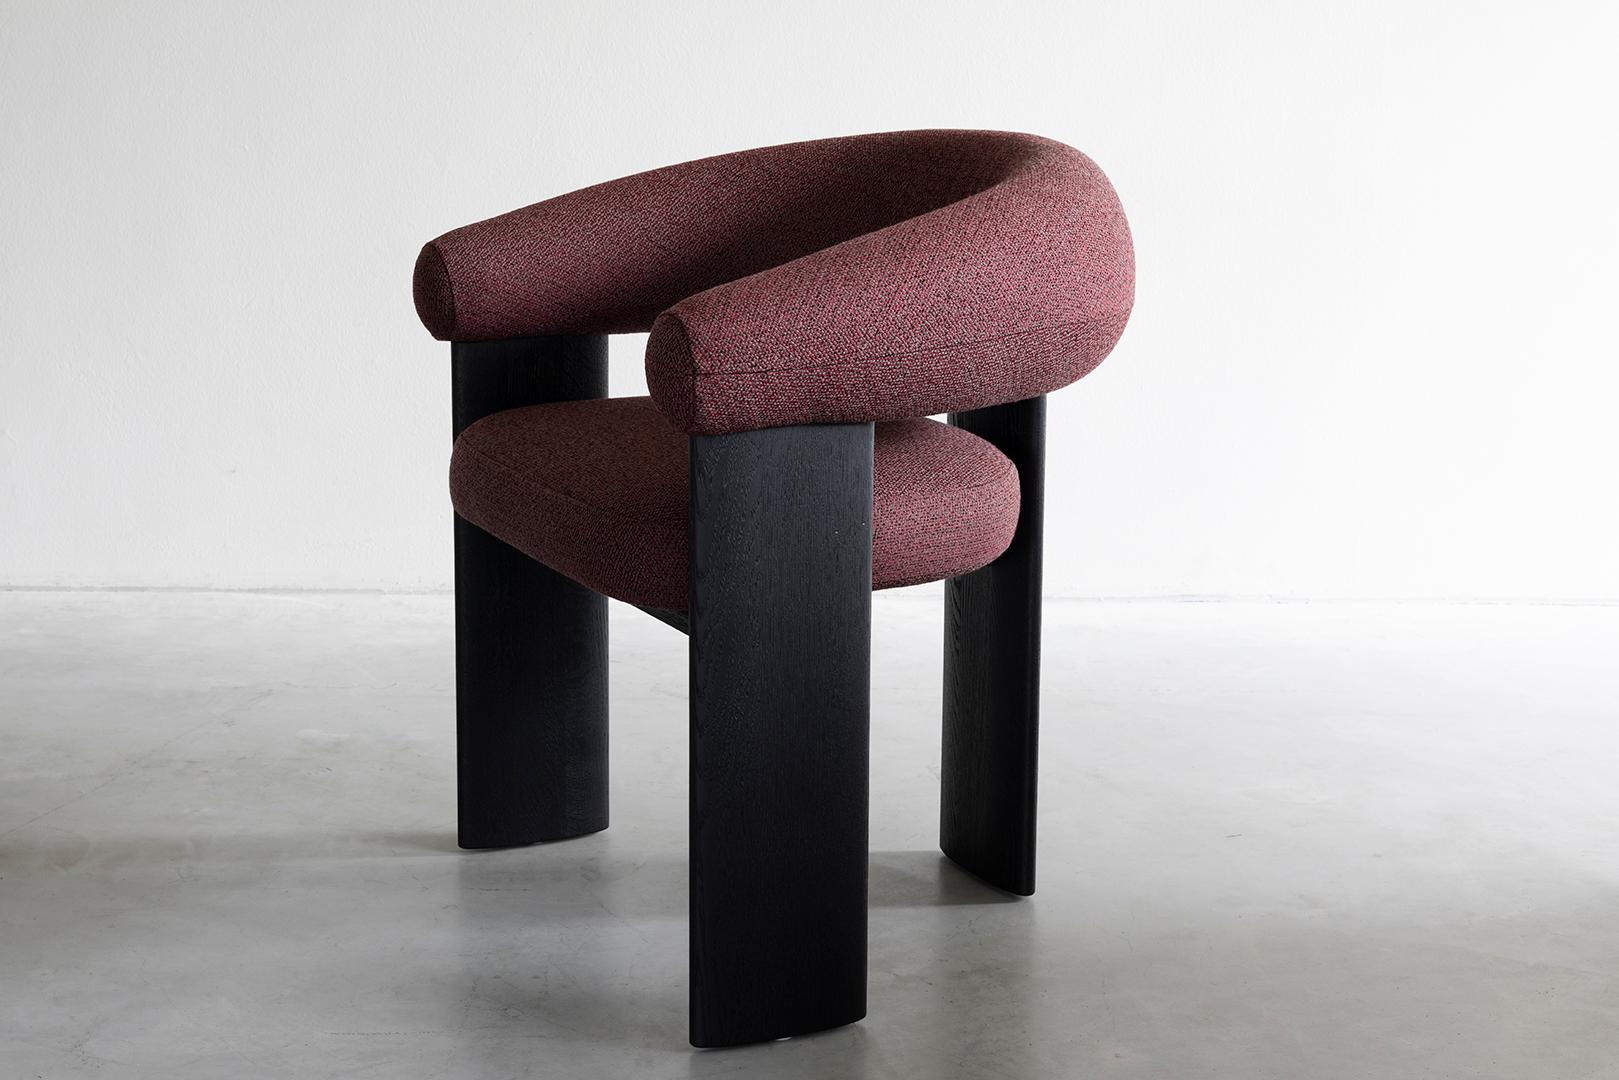 Bracci Armchair by Van Rossum
Dimensions: D 62 x W 72 x H 76 cm
Materials: Oak, Upholstery.

For over 40 years, Van Rossum has designed and handmade solid and sustainable furniture from the workshop in Bergharen, the Netherlands. Exquisite